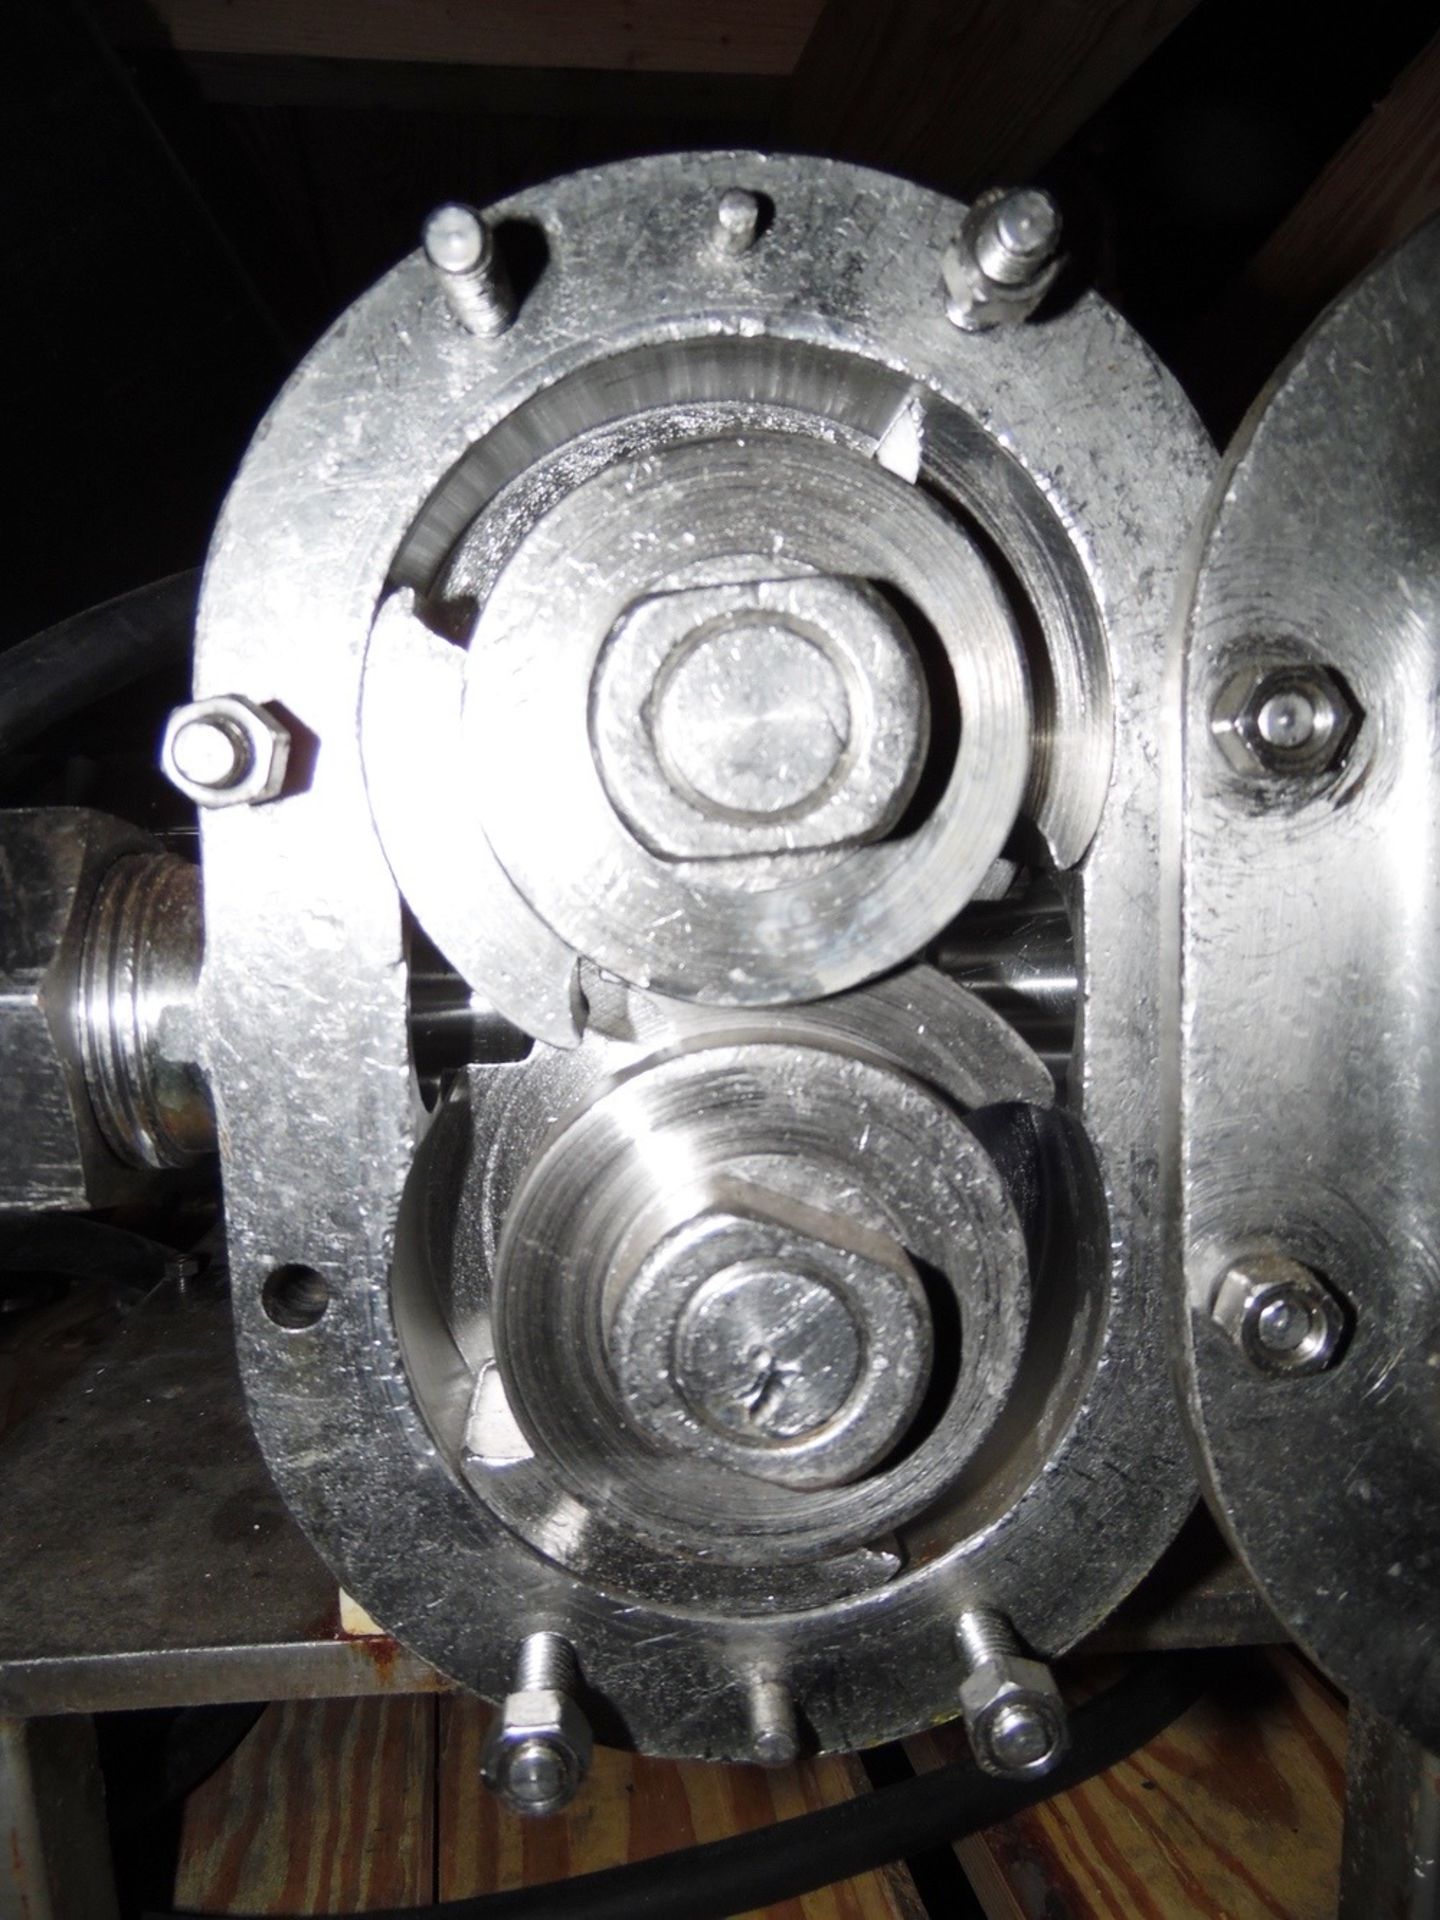 Waukesha Model D05961SS Positive Displacement Pump, 2" X 2", Stainless Steel | No Charge for Loading - Image 2 of 4